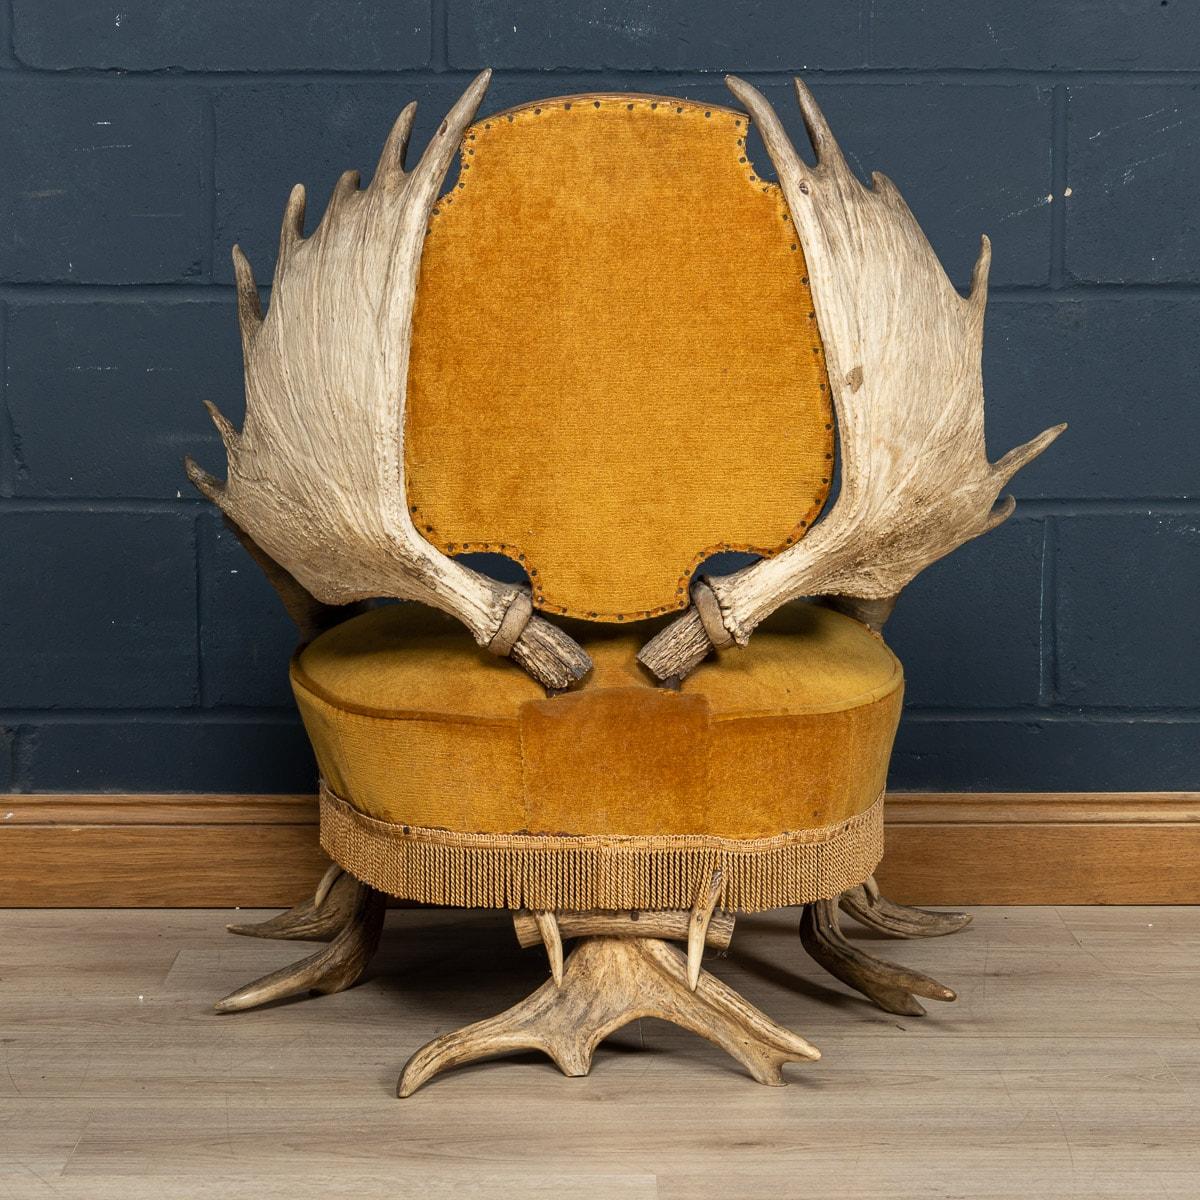 19th Century Swiss-German Black Forest Antler Horn Throne Chair For Sale 1